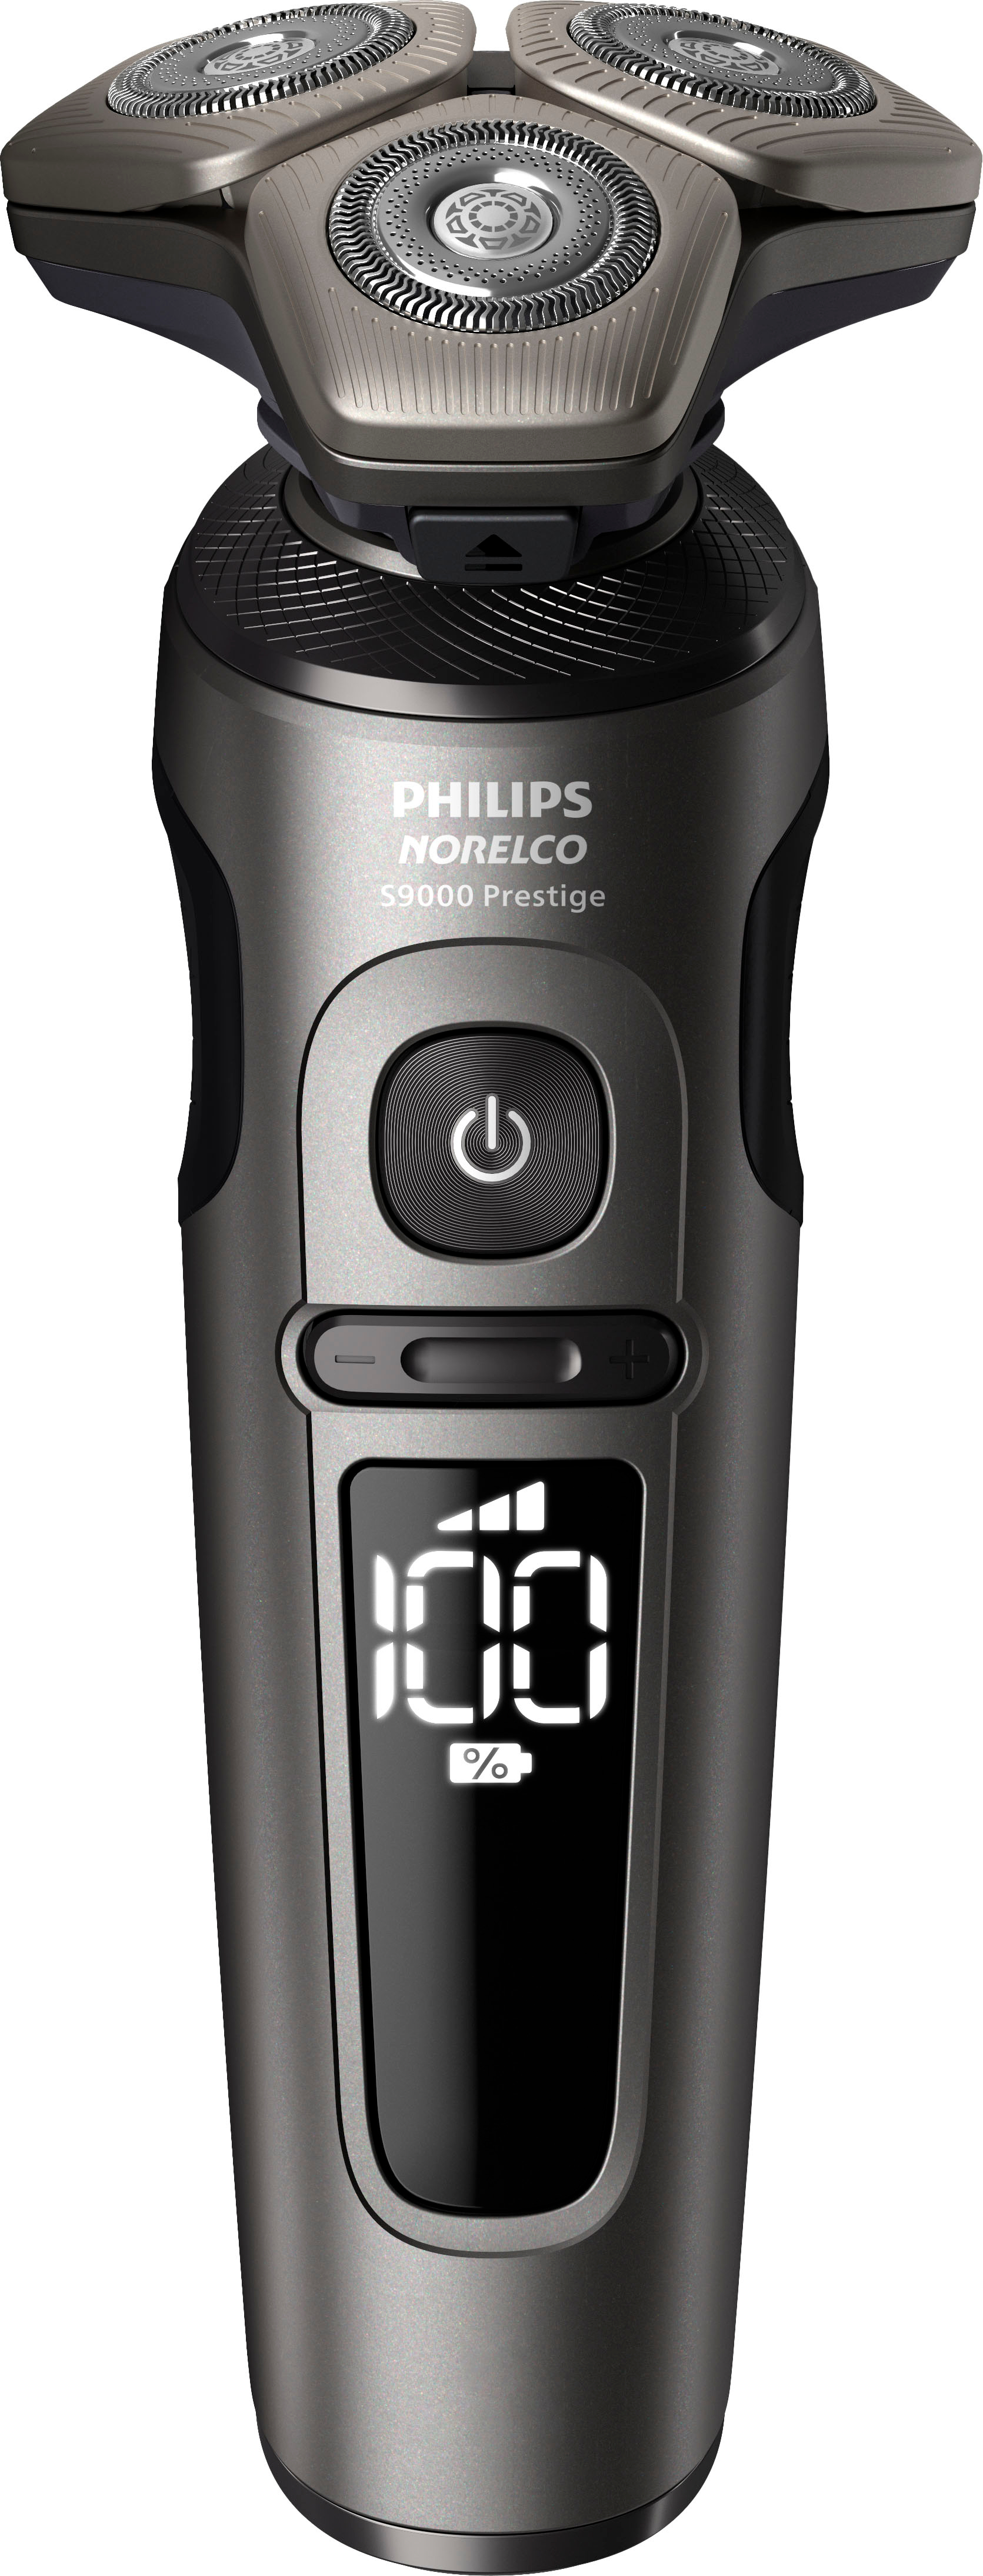 Philips Norelco 9000 Prestige Shaver with Qi Charging Pad and Premium Case  Black SP9872/86 - Best Buy